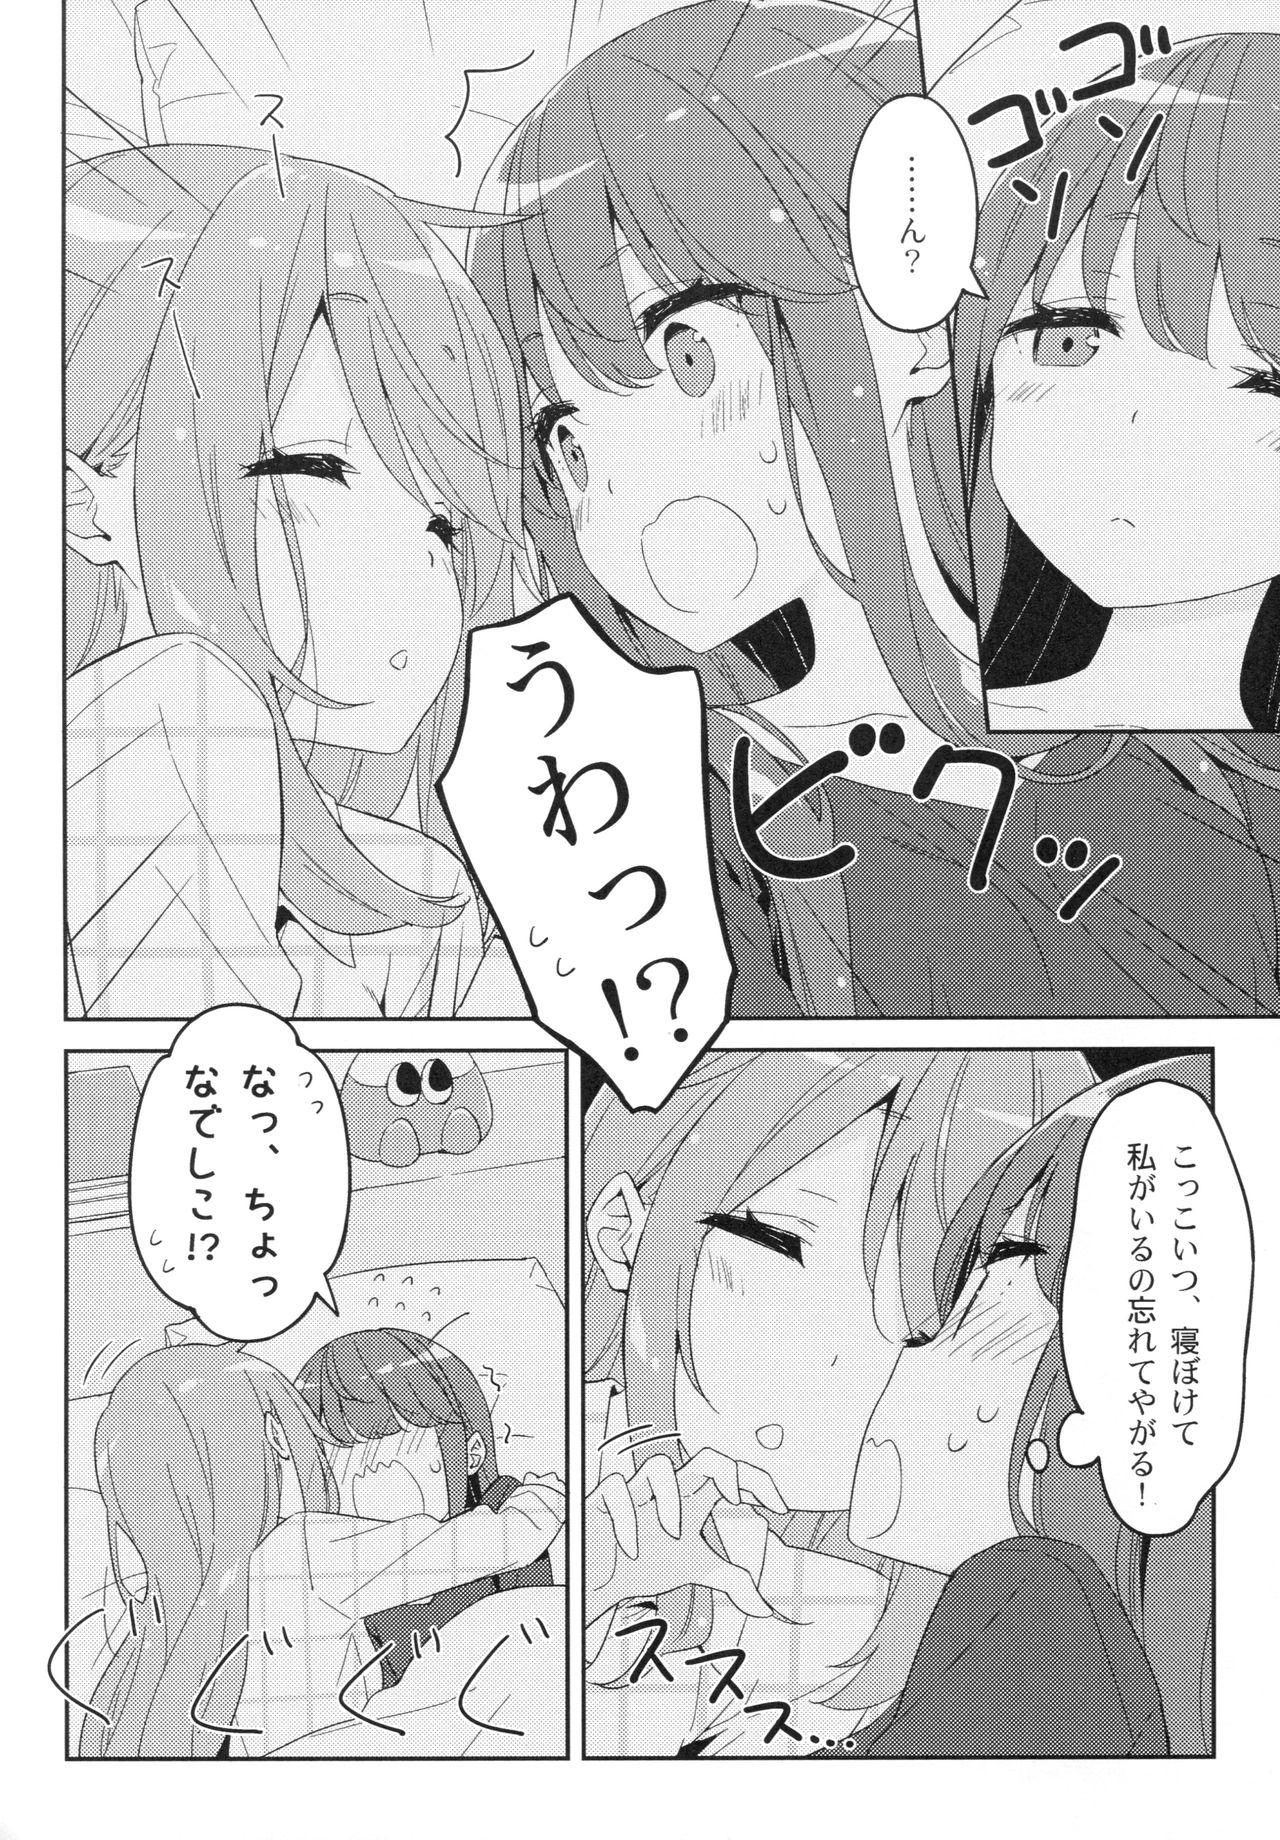 Bubble Luminocity 20 Nade Camp - Yuru camp Pounded - Page 11